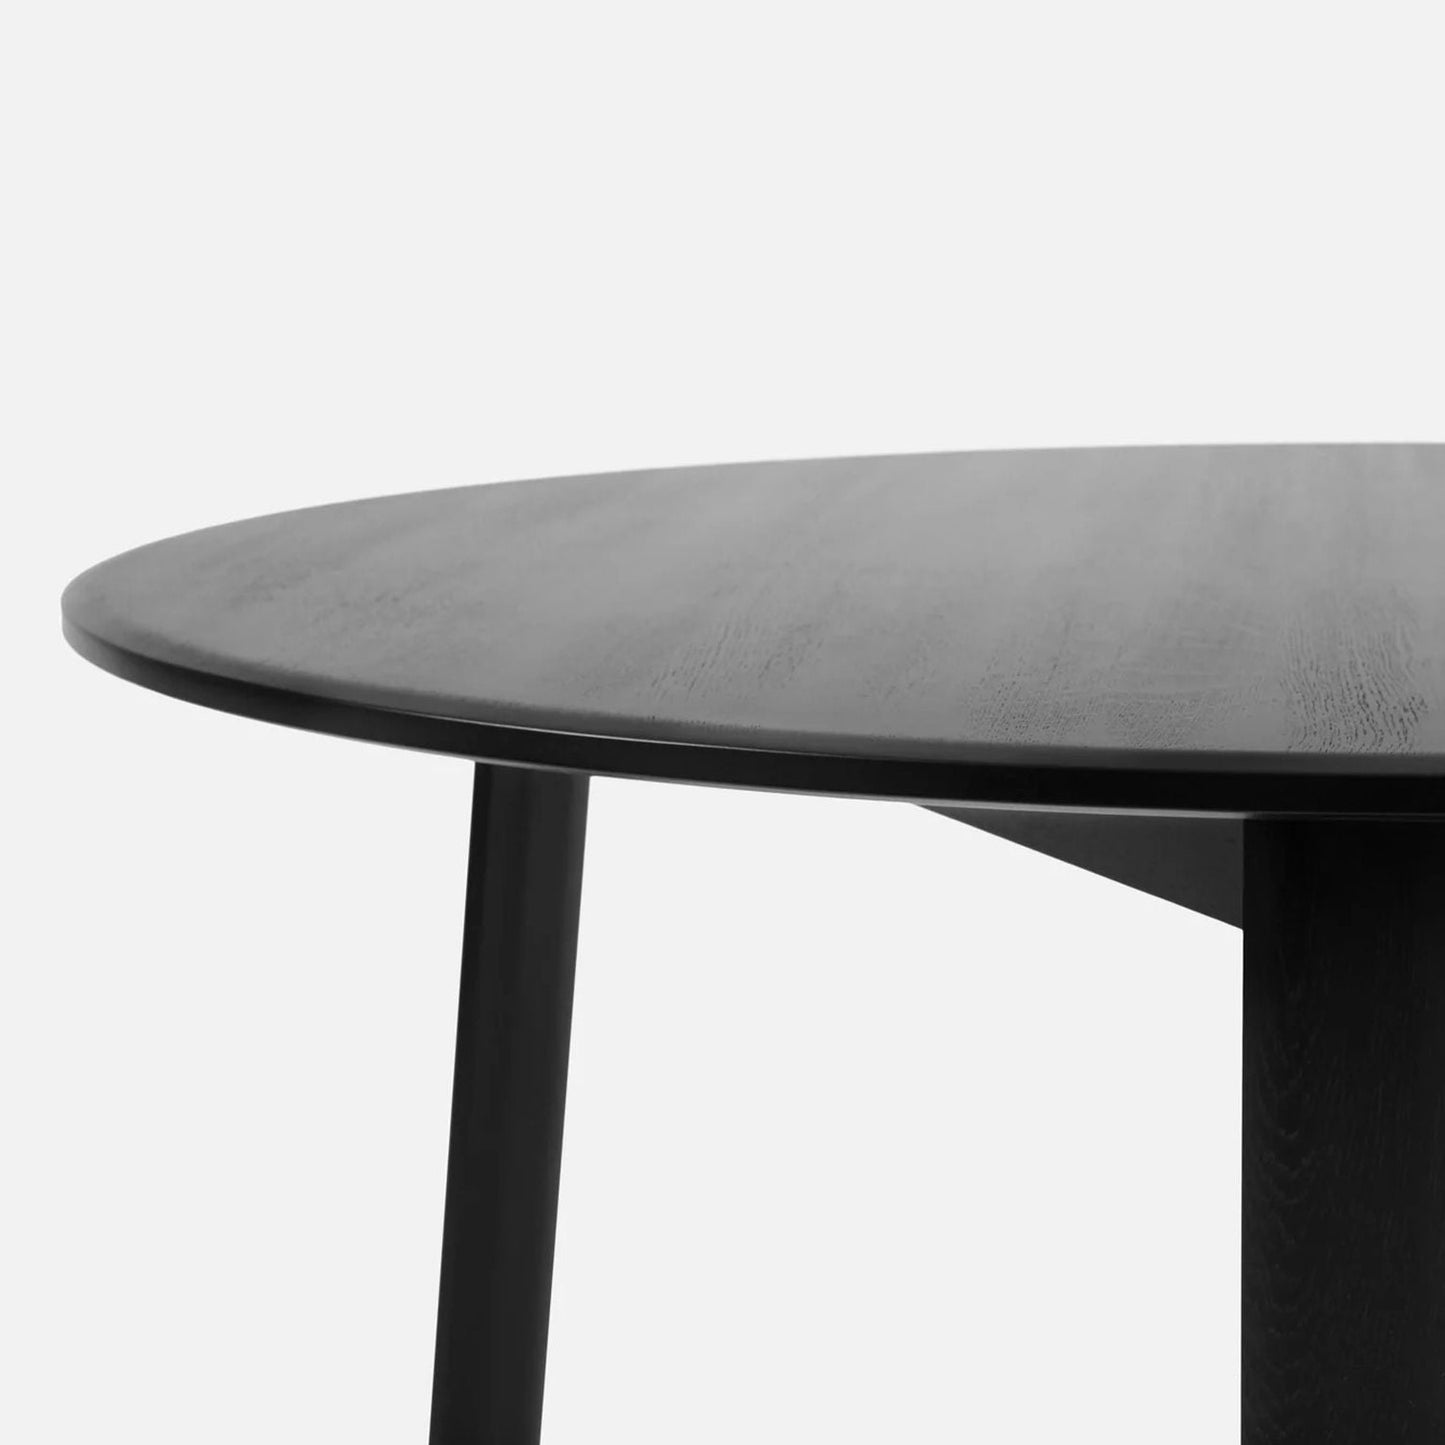 Alle Round Dining Table